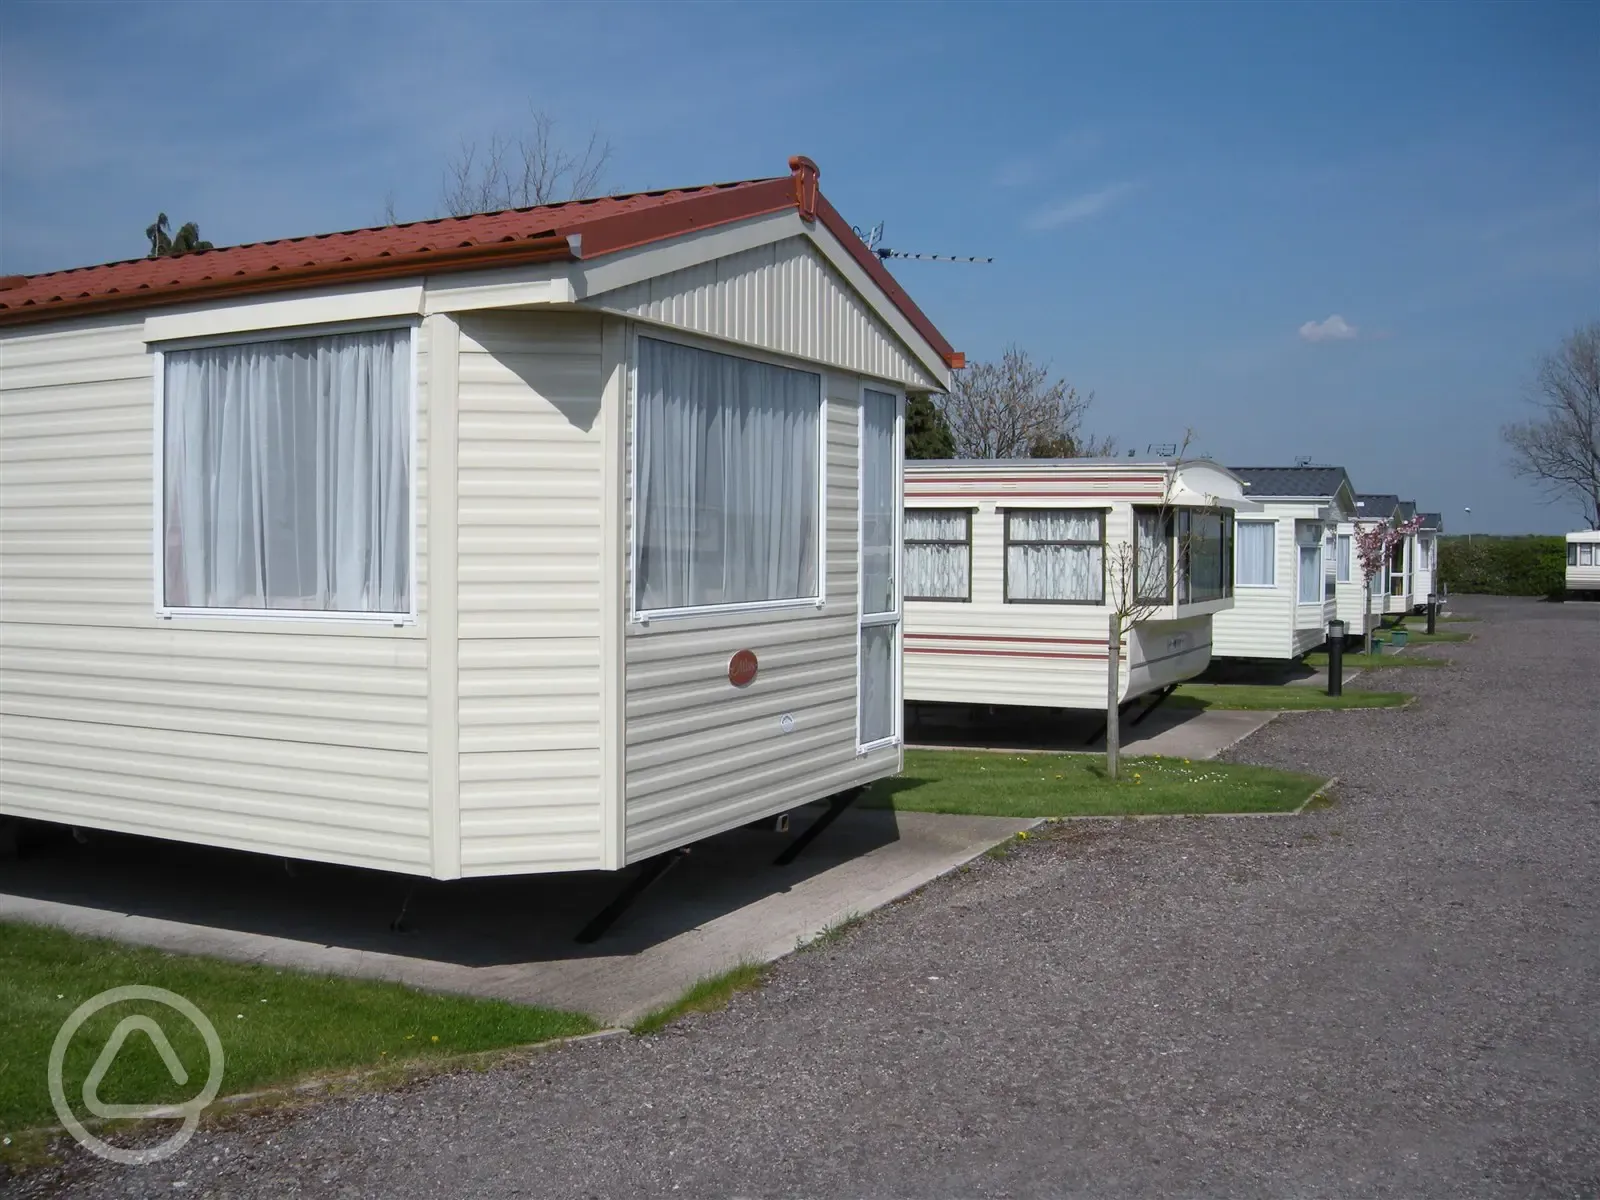 'C' section holiday homes